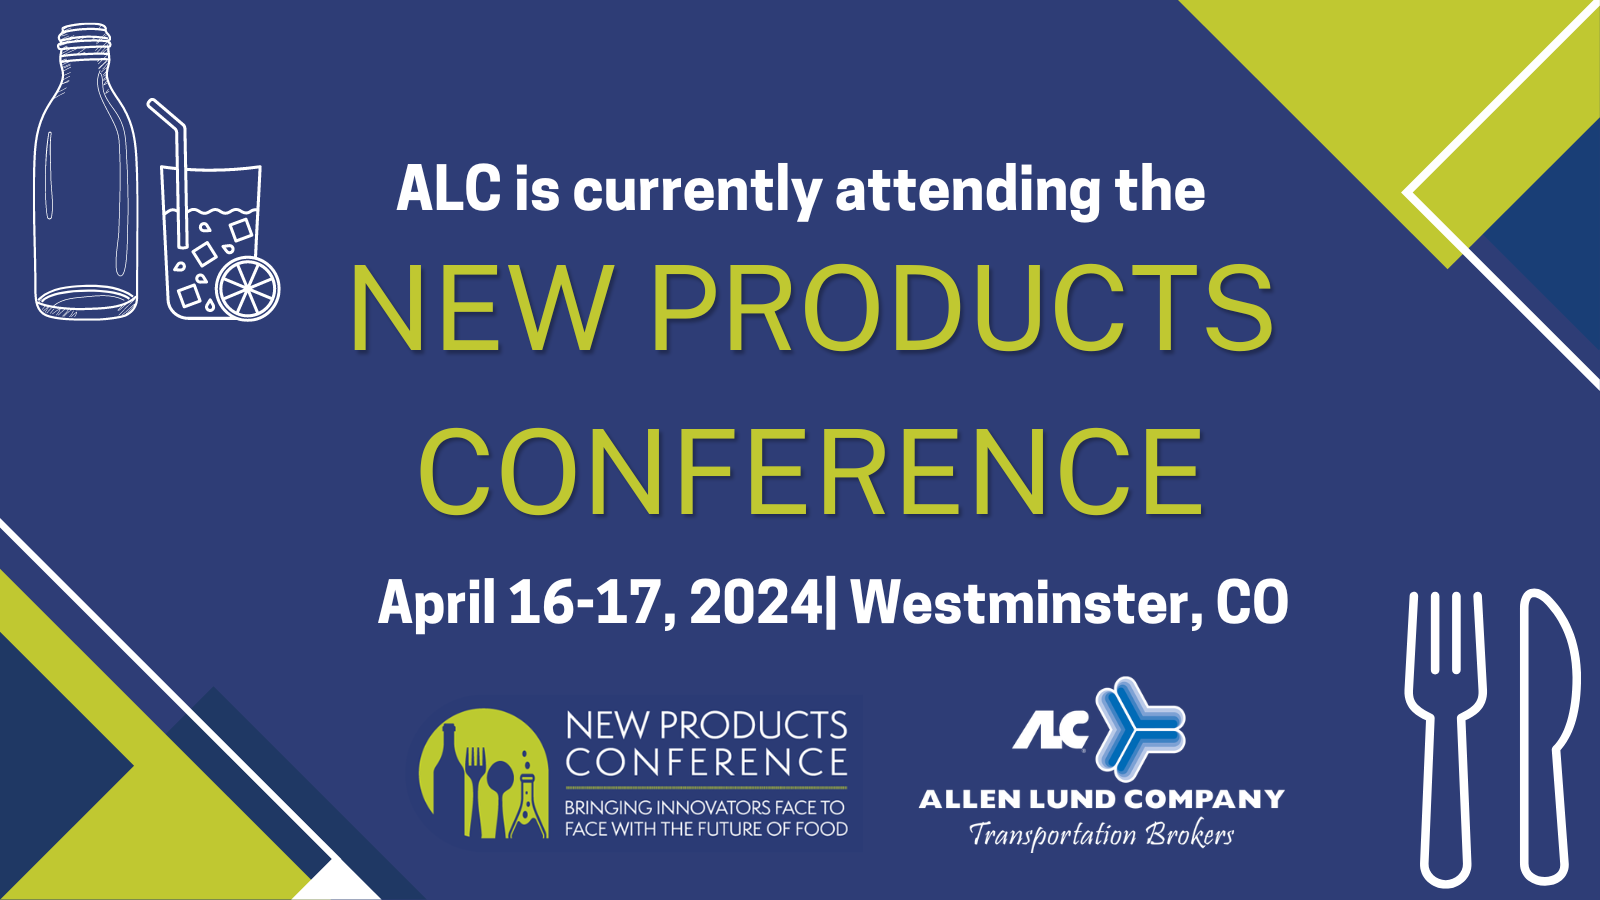 ALC is currently attending the New Products Conference 2024